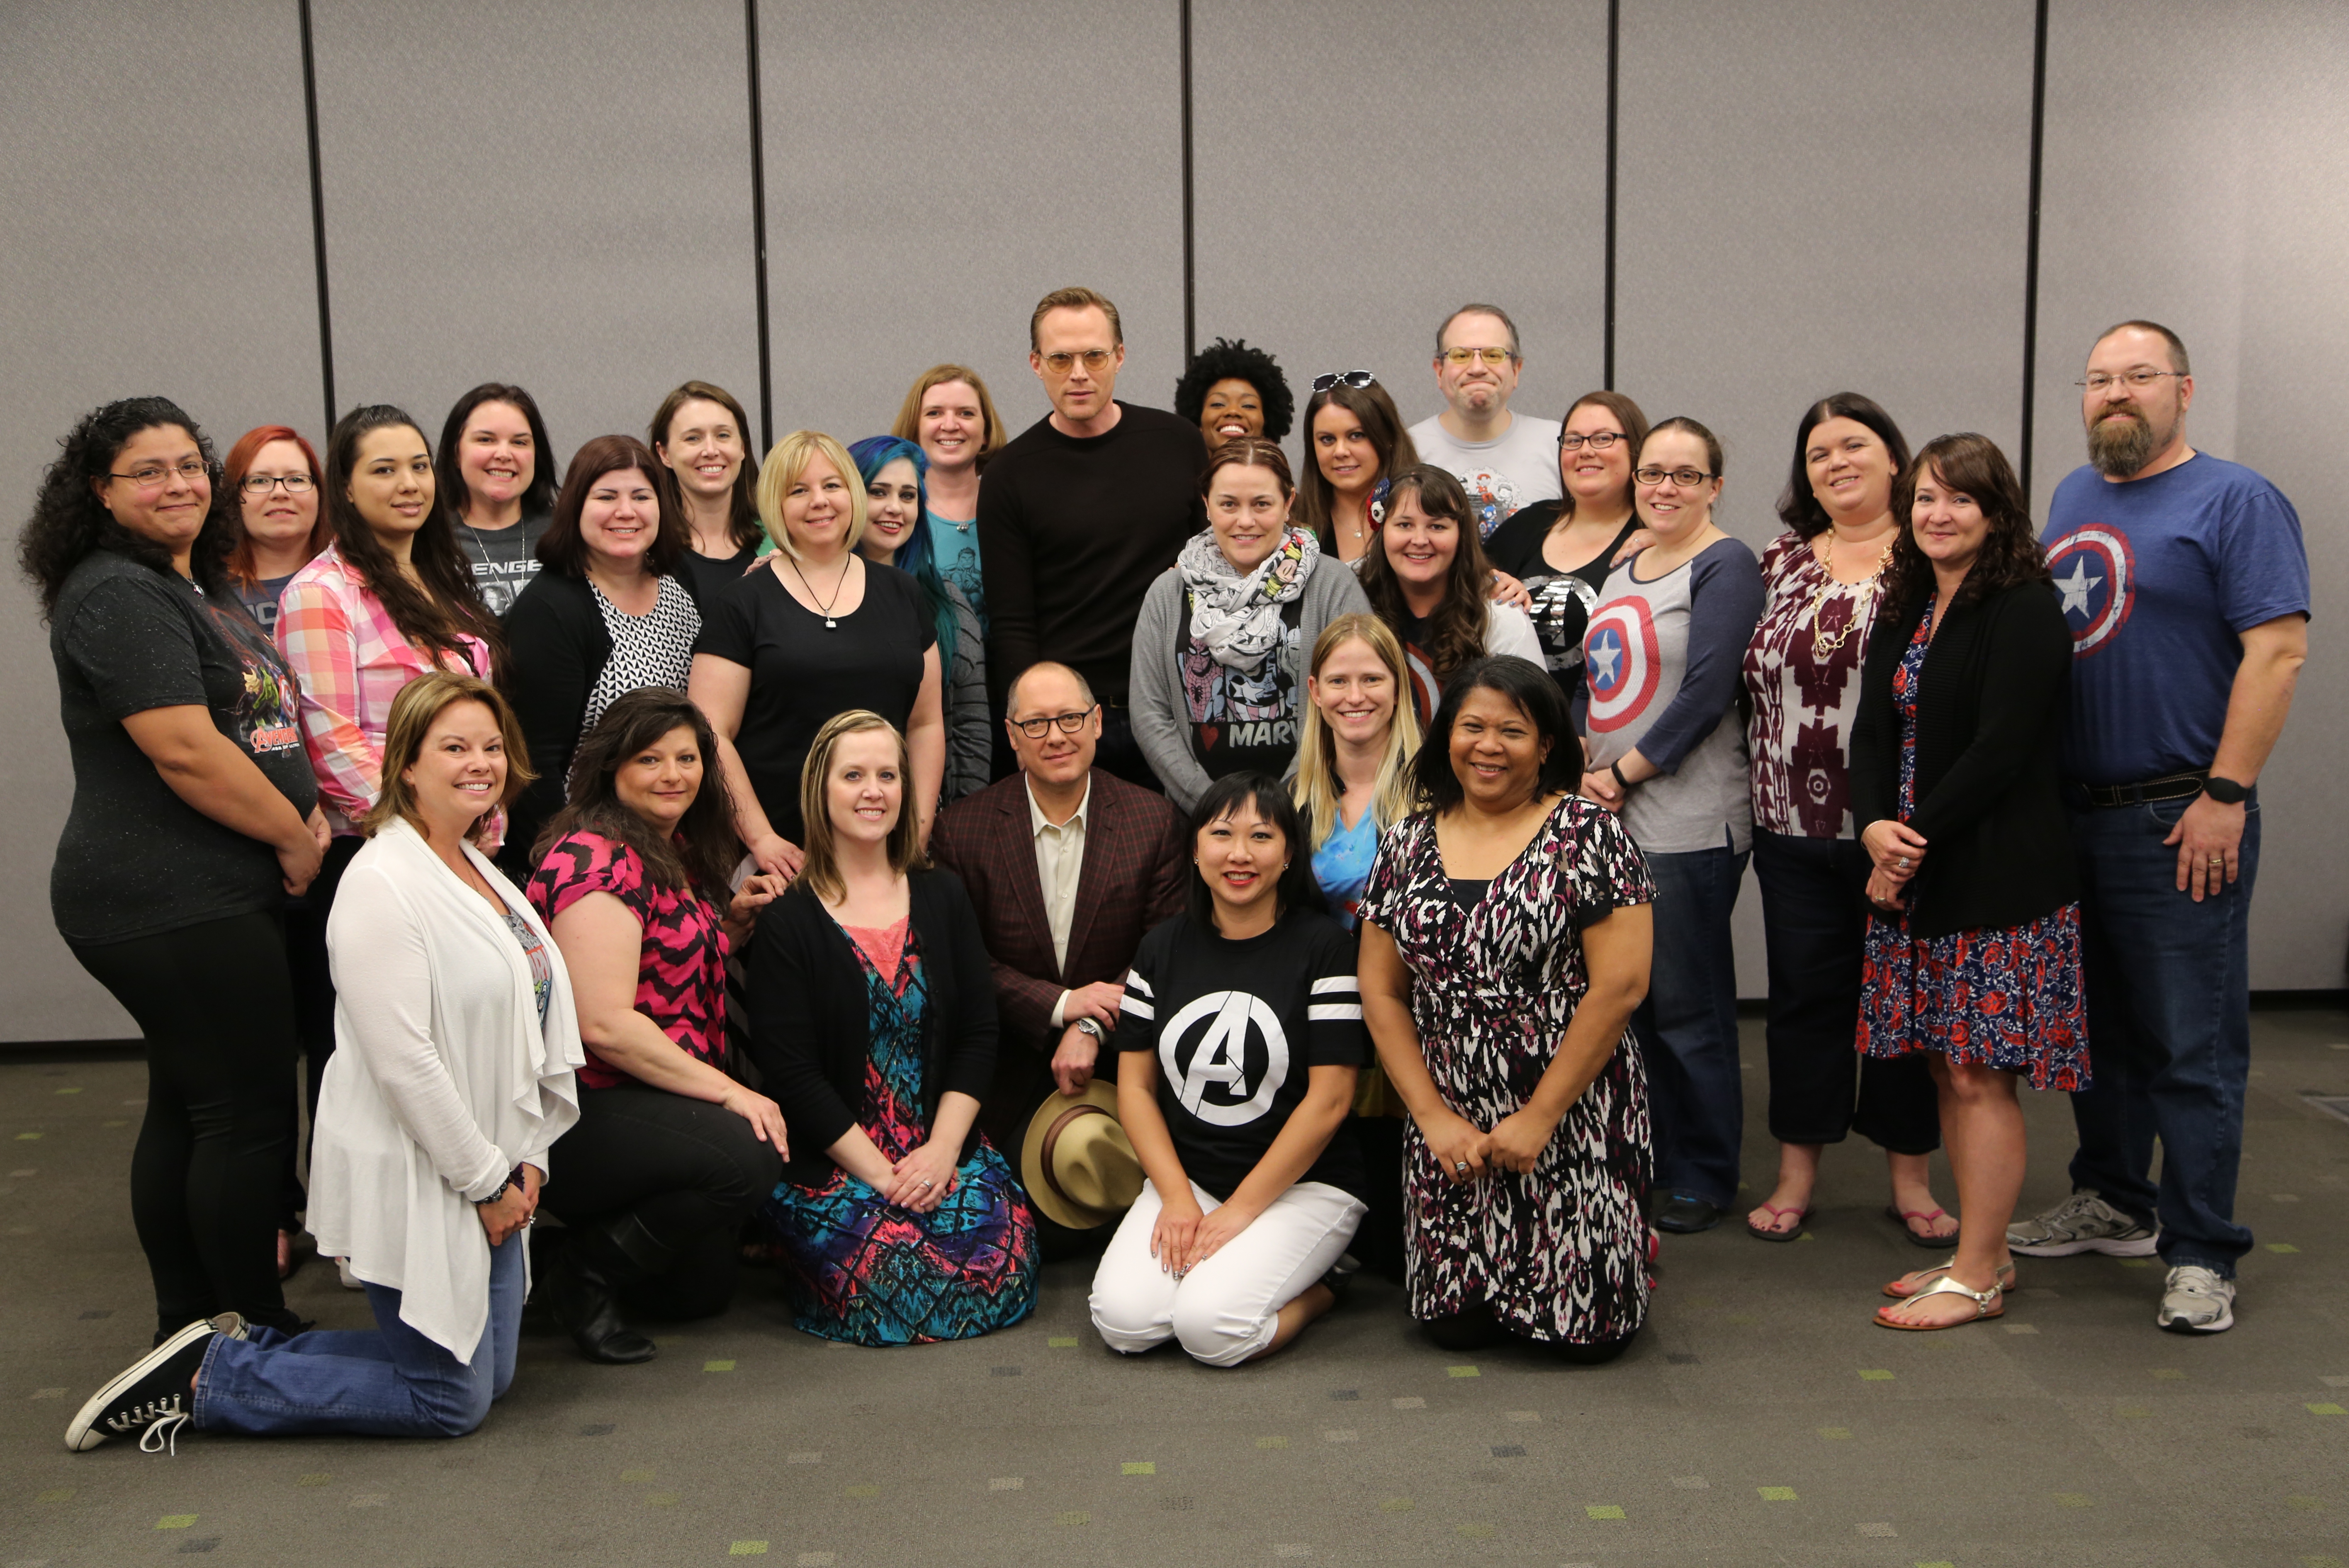 Paul Bettany and James Spader with the #AvengersEvent bloggers |Photo courtesy of Disney